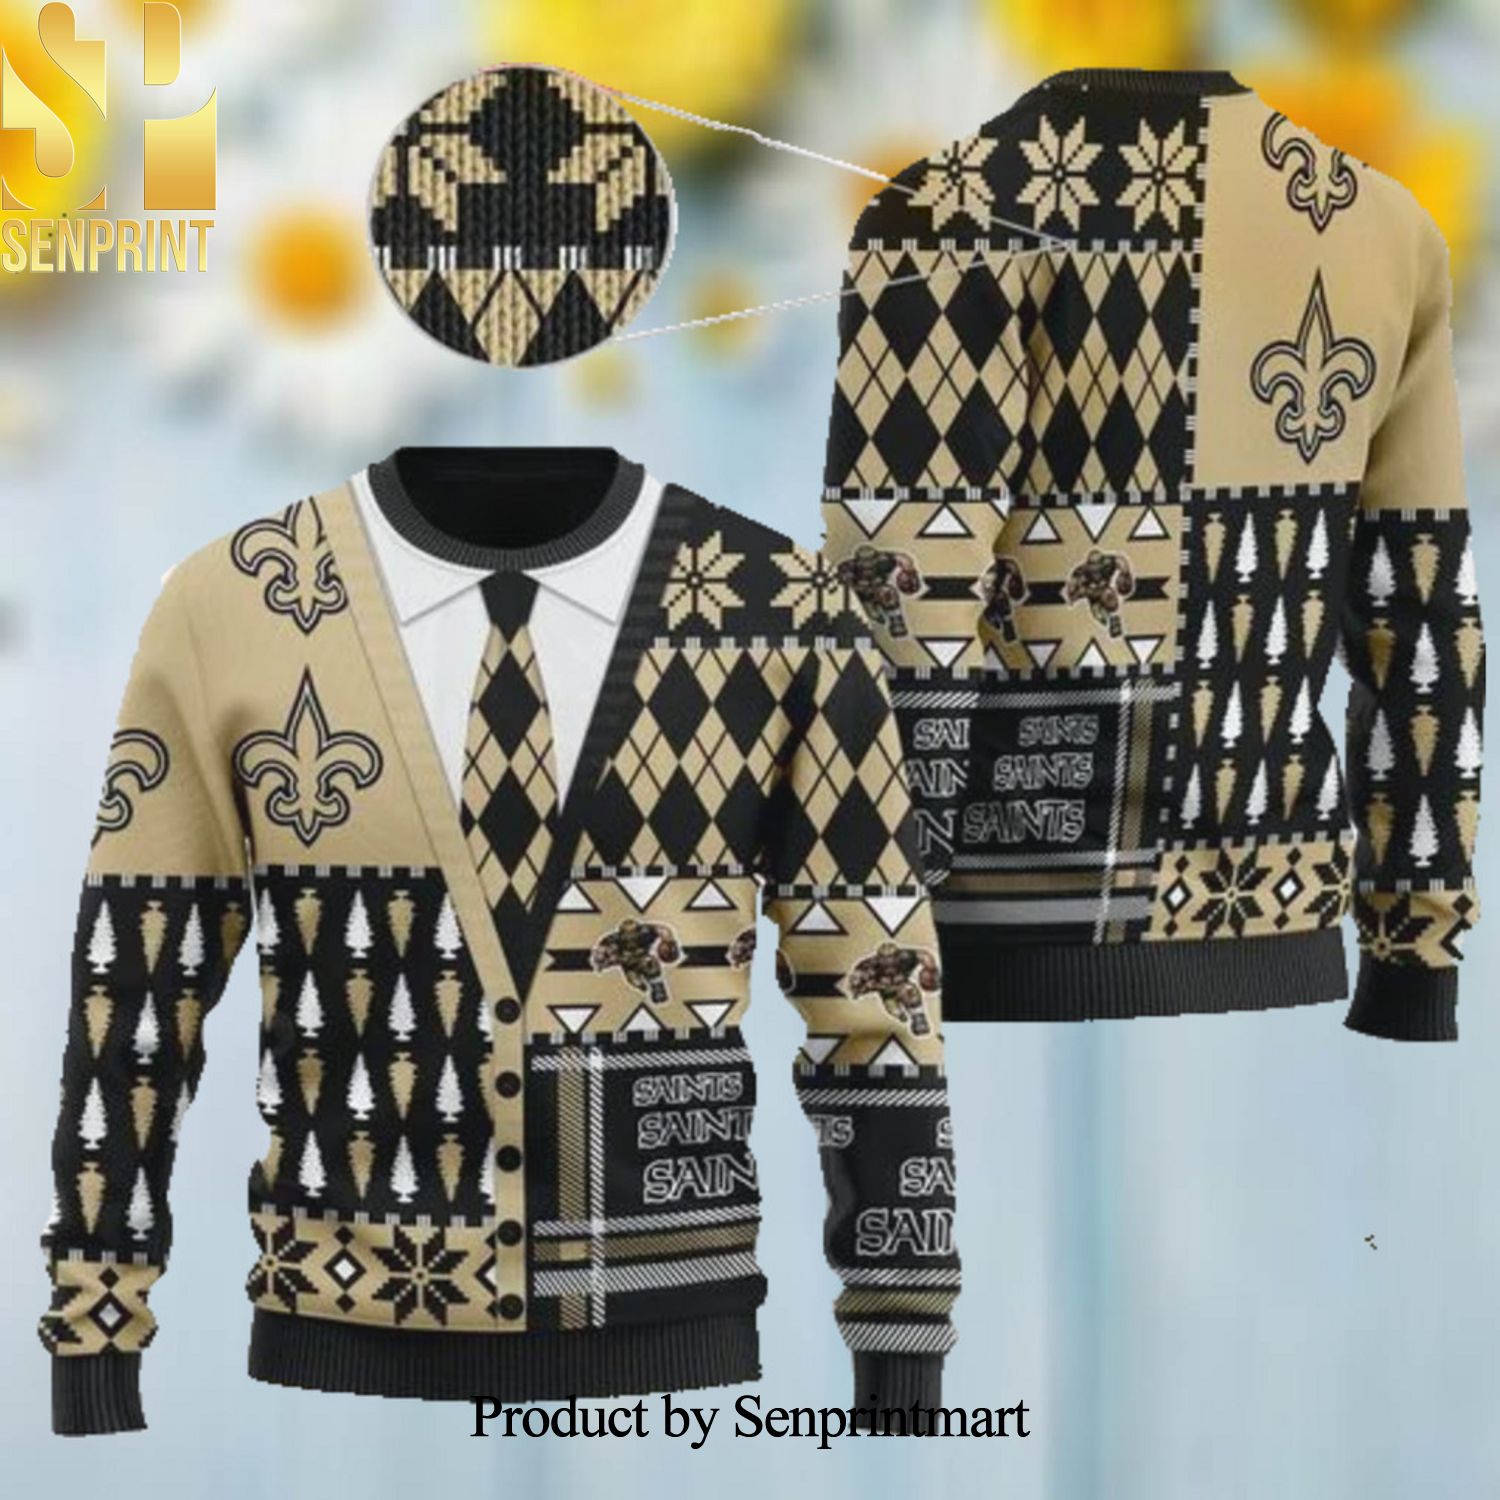 New Orleans Saints NFL American Football Team Cardigan Style Ugly Christmas Wool Knitted Sweater